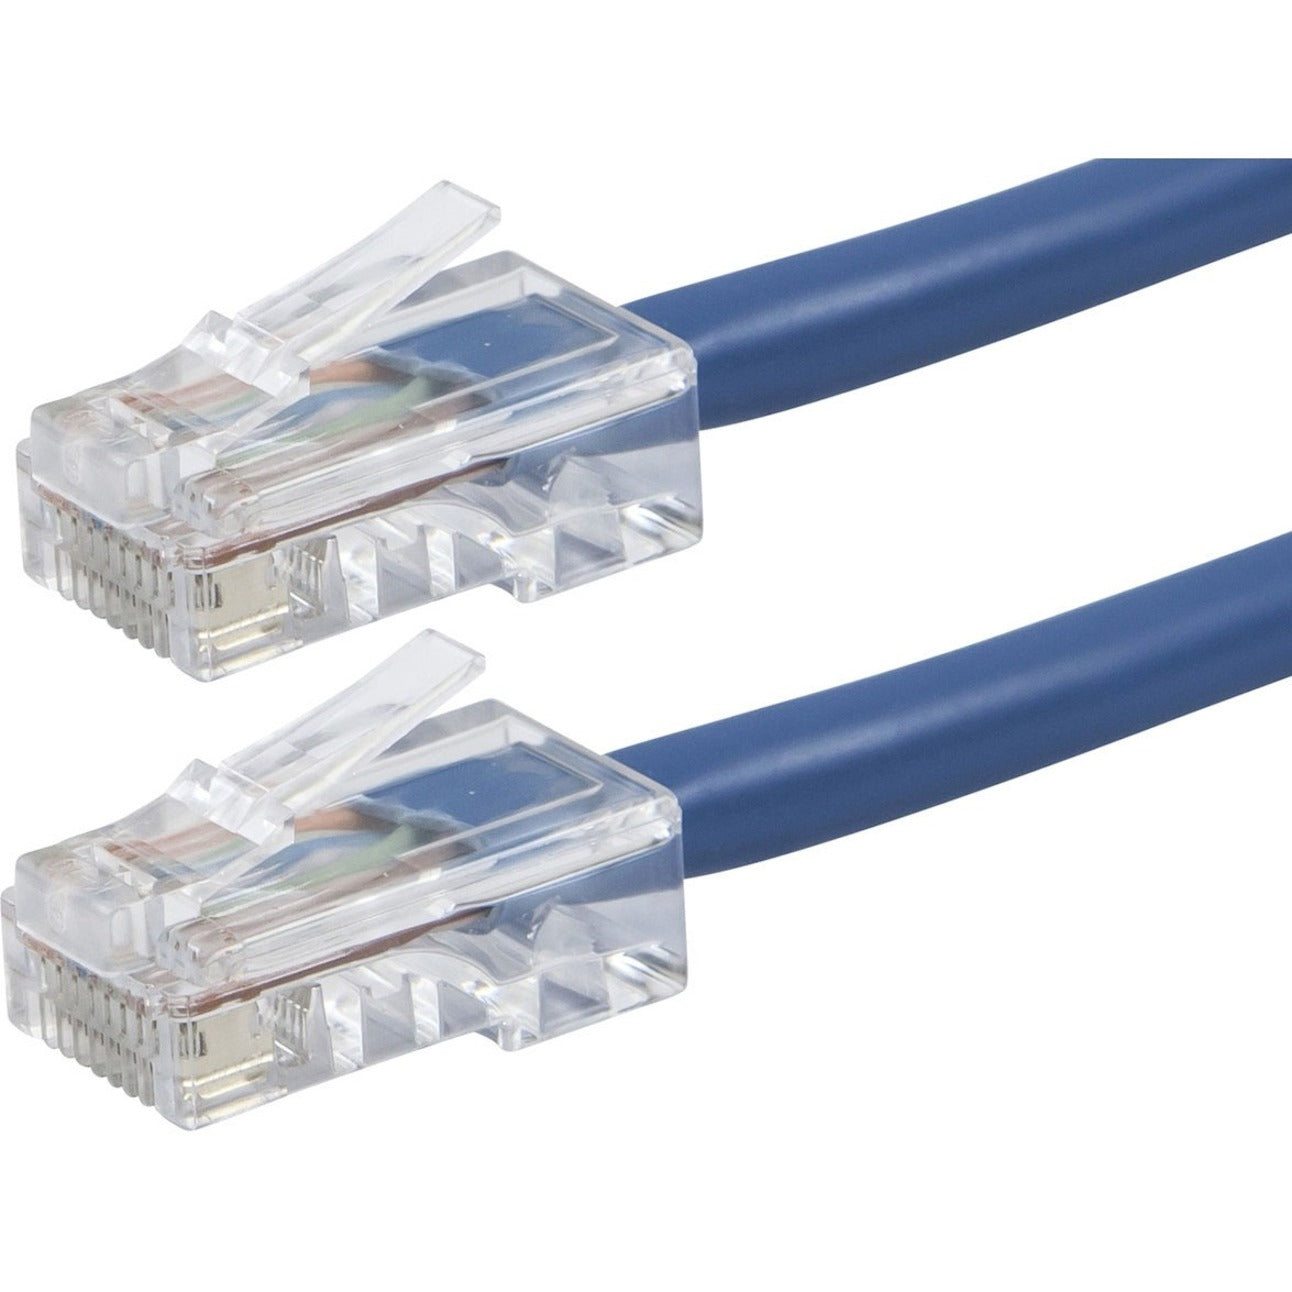 Monoprice 13405 ZEROboot Series Cat6 24AWG UTP Ethernet Network Patch Cable, 7ft Blue